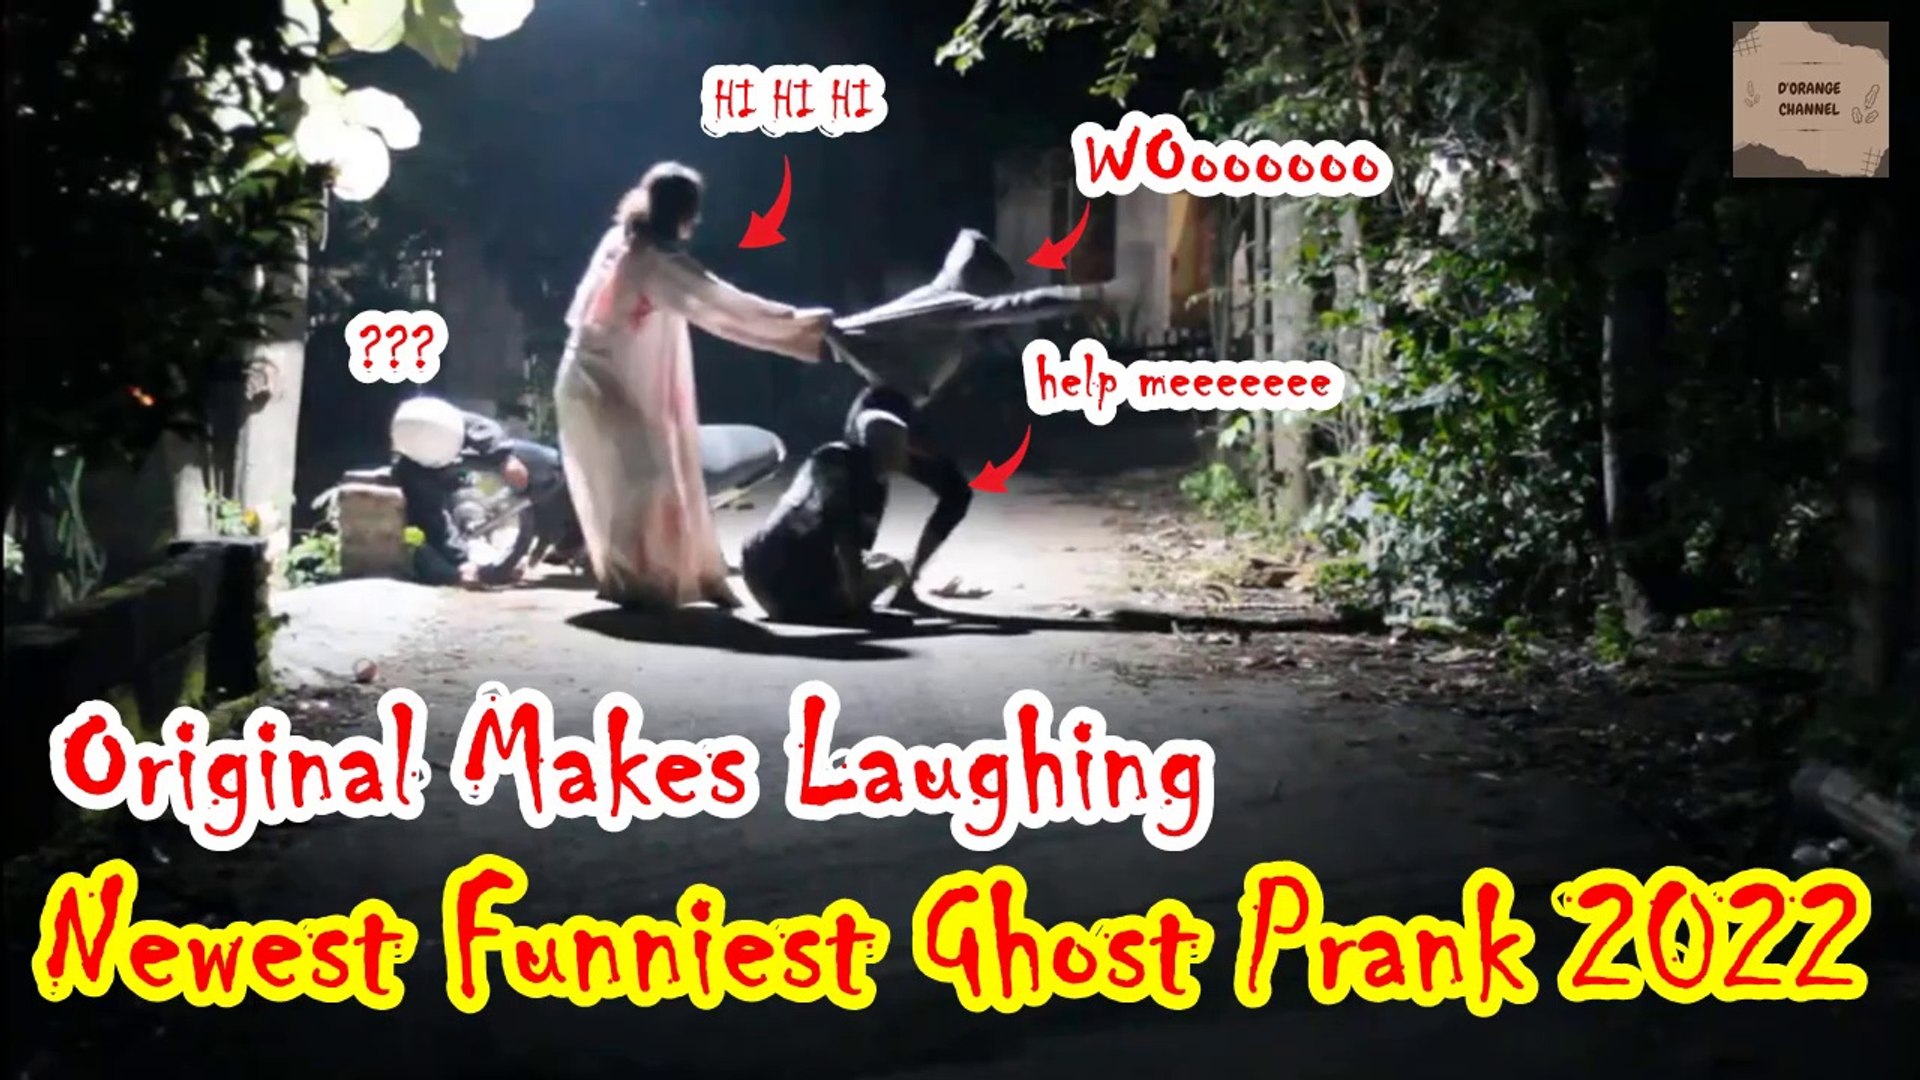 ⁣Original Makes Laughing, Newest Funniest Ghost Prank 2022